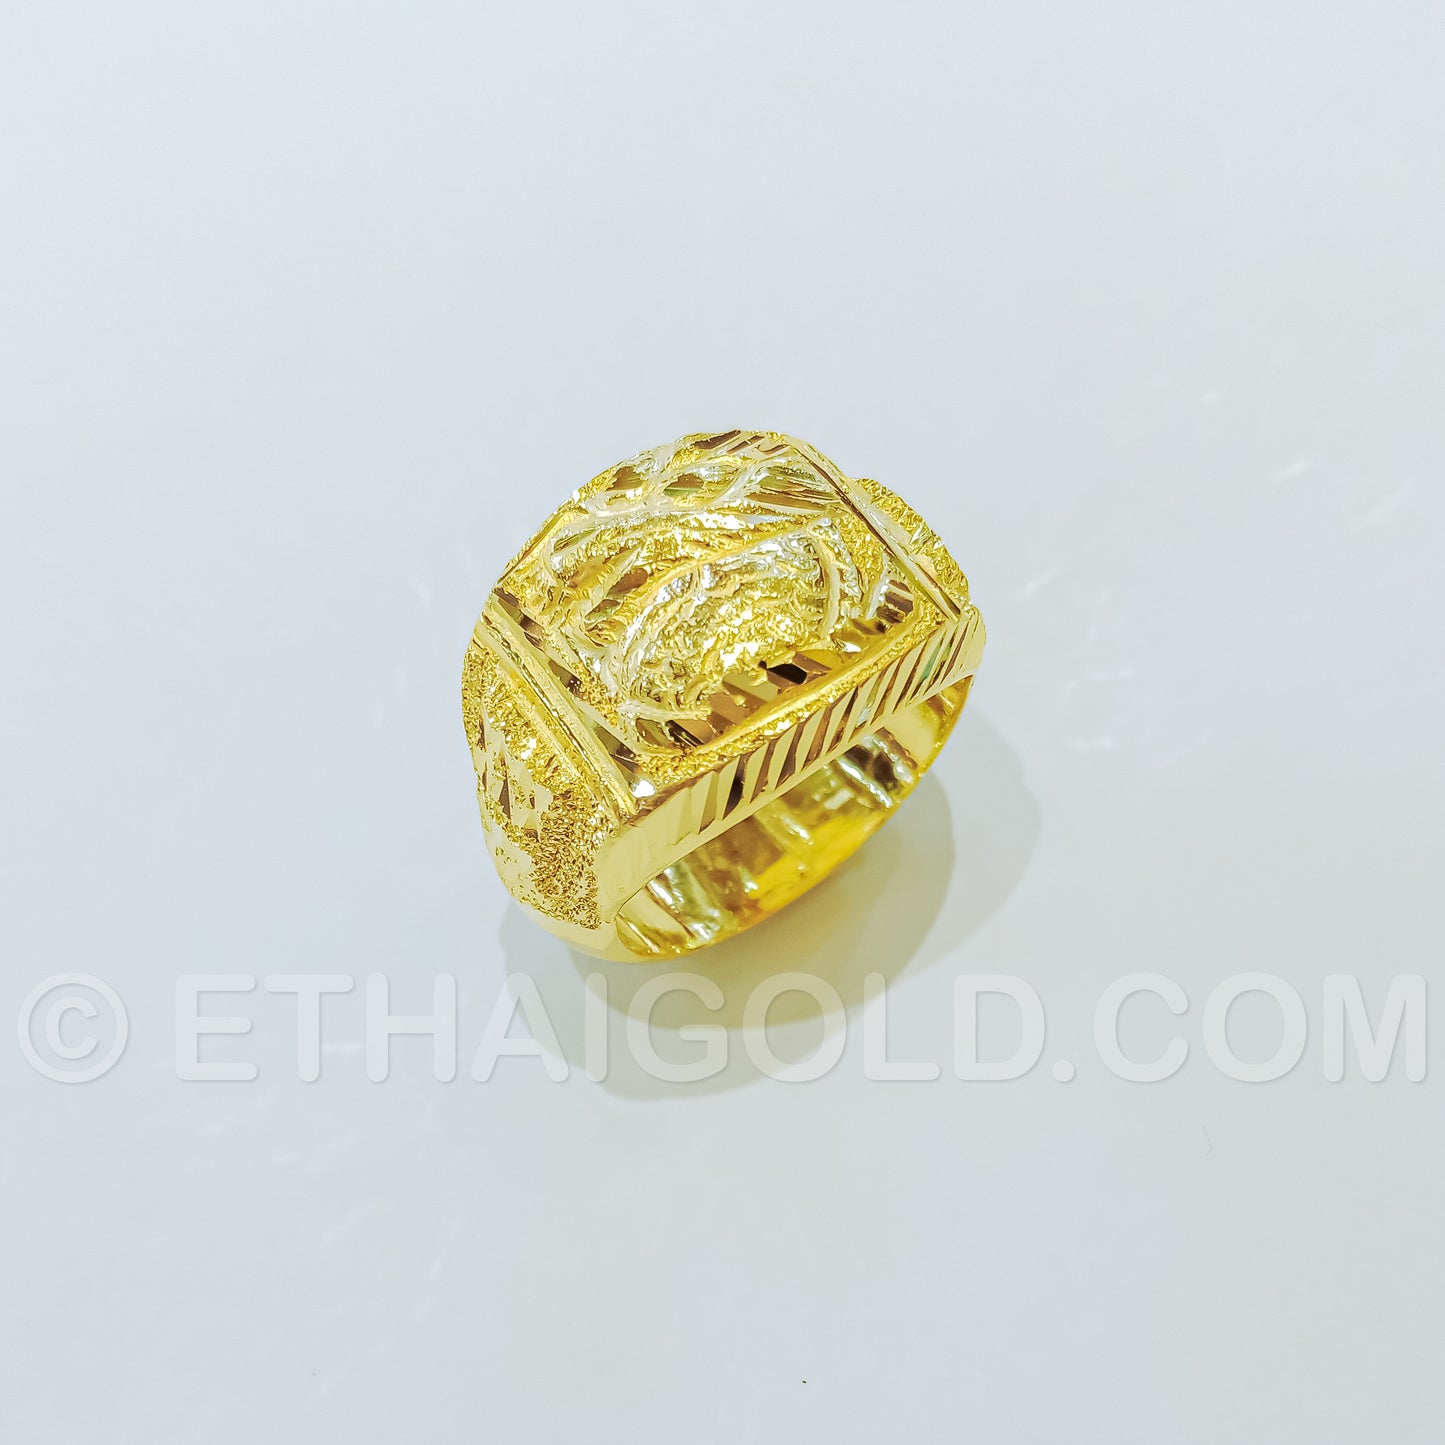 1/8 BAHT POLISHED SPARKLING DIAMOND-CUT HOLLOW SQUARE DRAGON RING IN 23K GOLD (ID: R150HS)